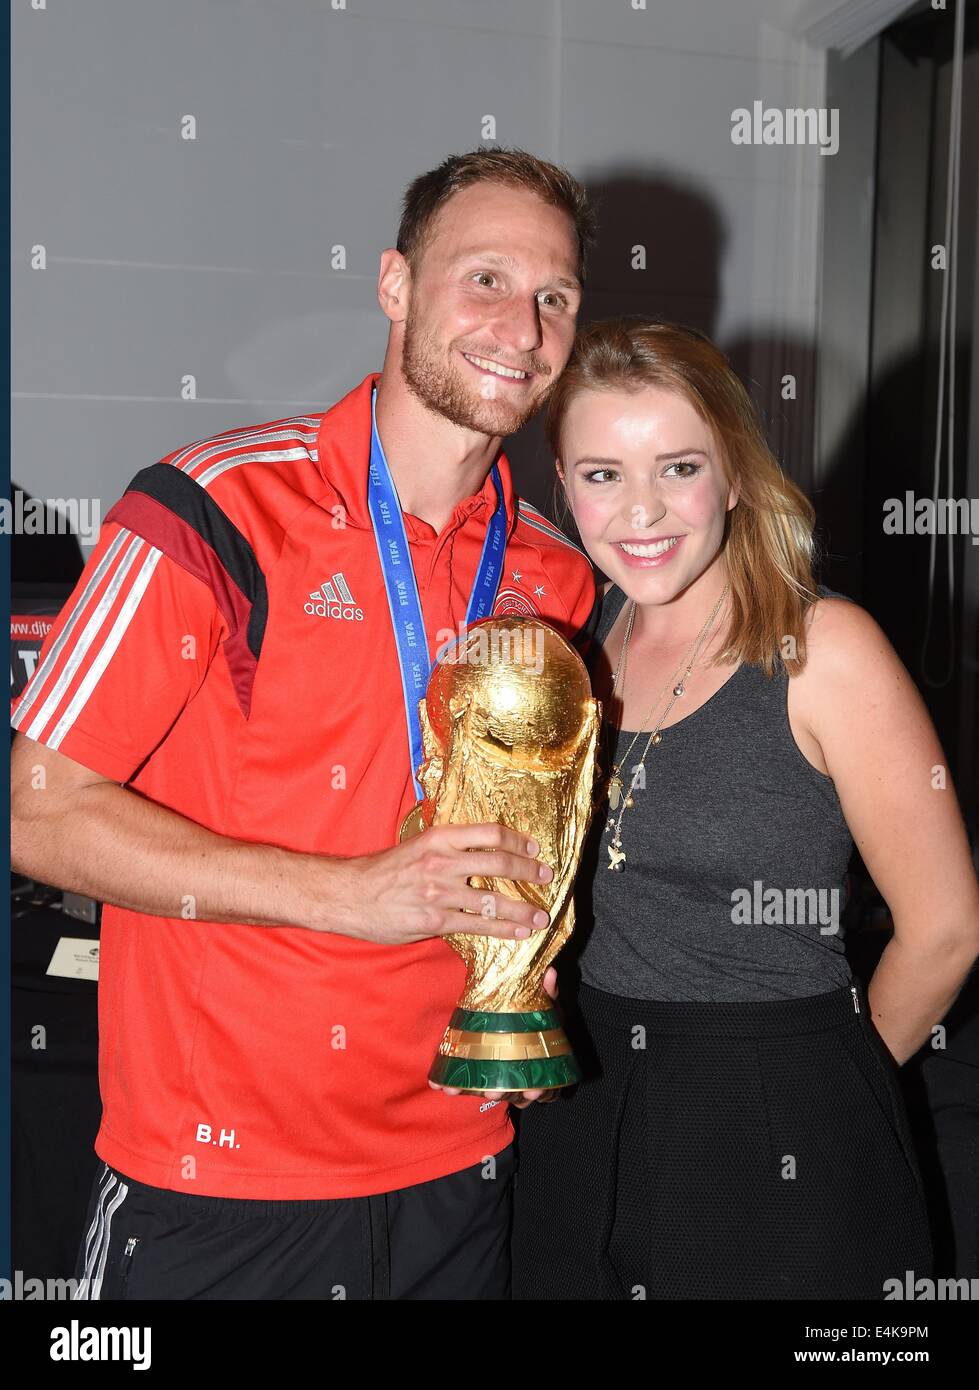 Handout: Rio de Janeiro, Brazil. 14th July, 2014. Benedikt Hoewedes and his girlfriend Lisa Wesseler, celebrating Germany's victory in the Soccer World Cup with the trophy at Hotel Sheraton in Rio De Janeiro, Brazil on 13 July 2014. Germany won 1-0 against Argentina in the FIFA World Cup 2014 Final match. (: Image for in connection with the current reporting on the World Cup and together with the source: Photo: Markus Gilliar/DFB/dpa.) Credit:  dpa picture alliance/Alamy Live News Stock Photo